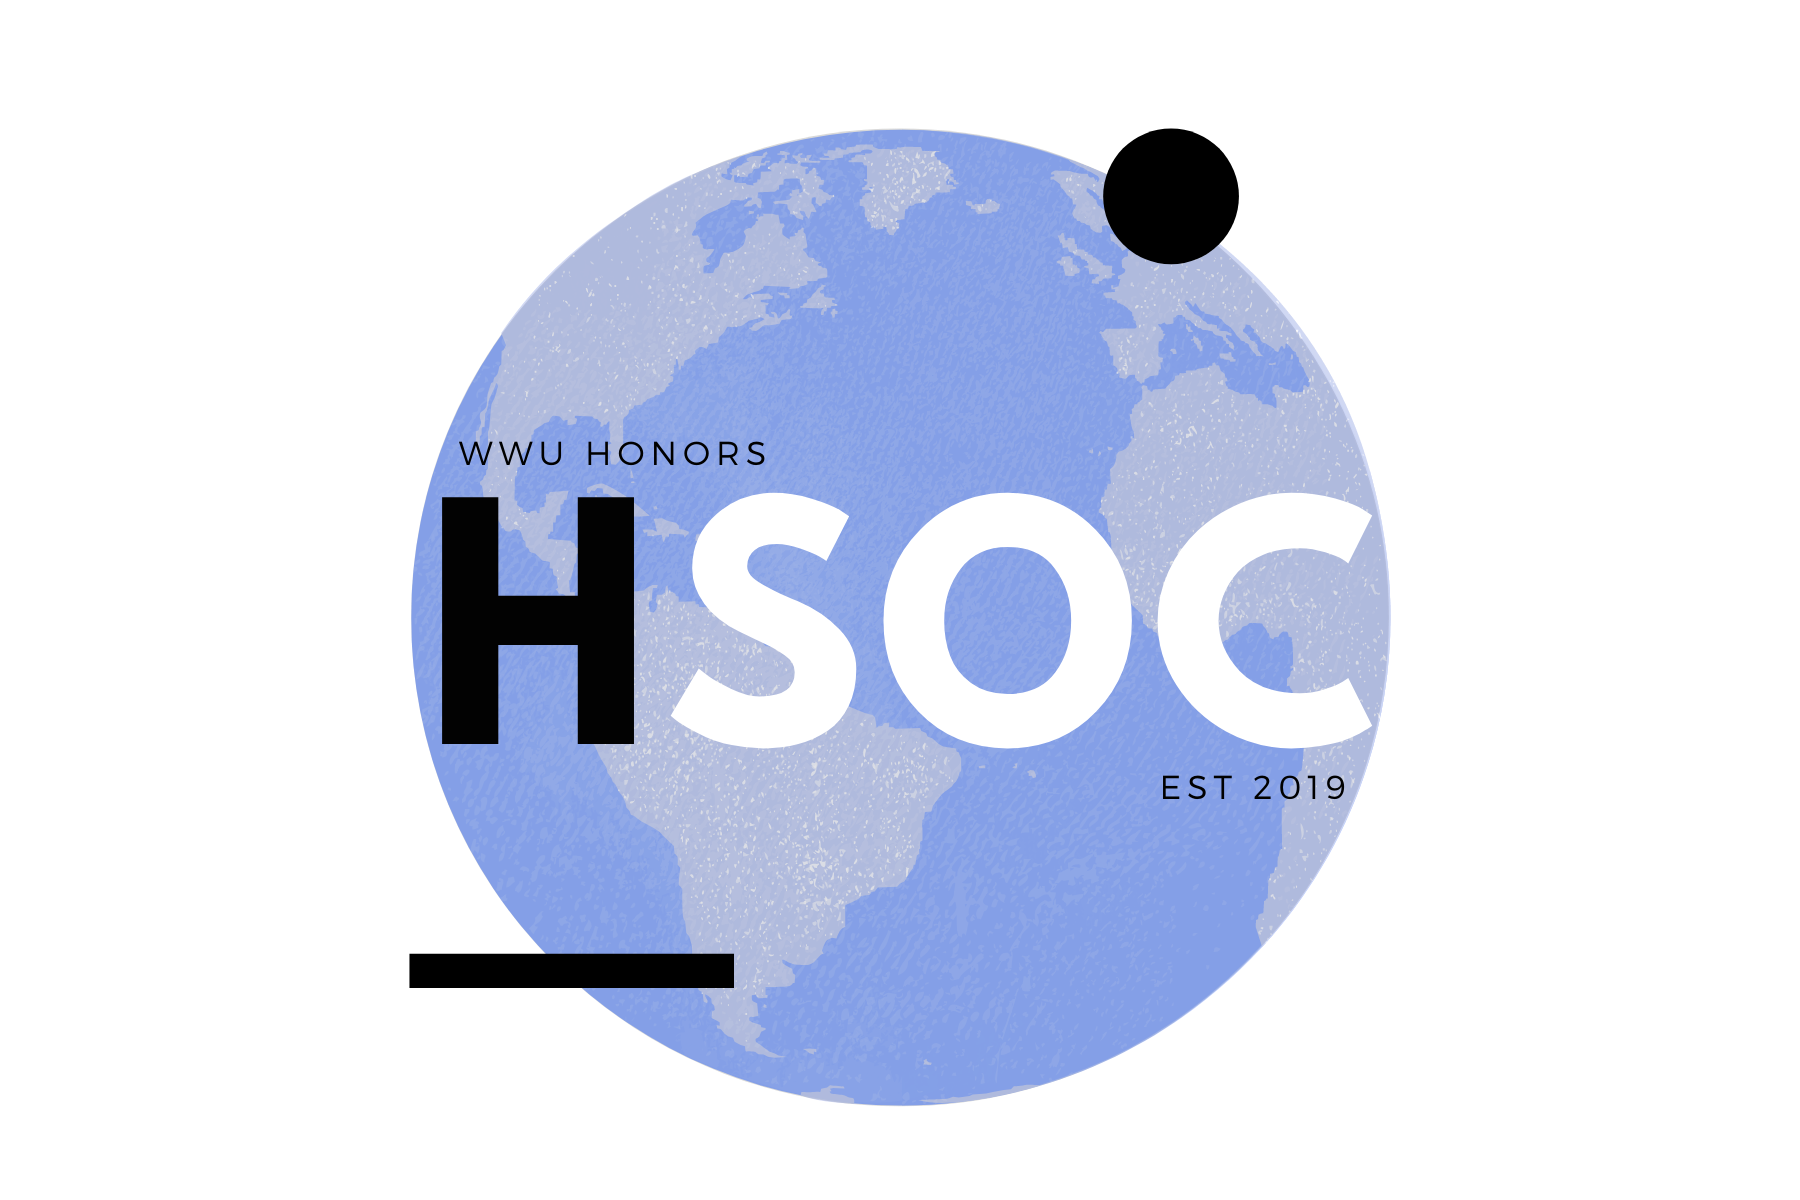 Honors Students of Color logo: A blue globe with HSOC in the foreground. Est 2019